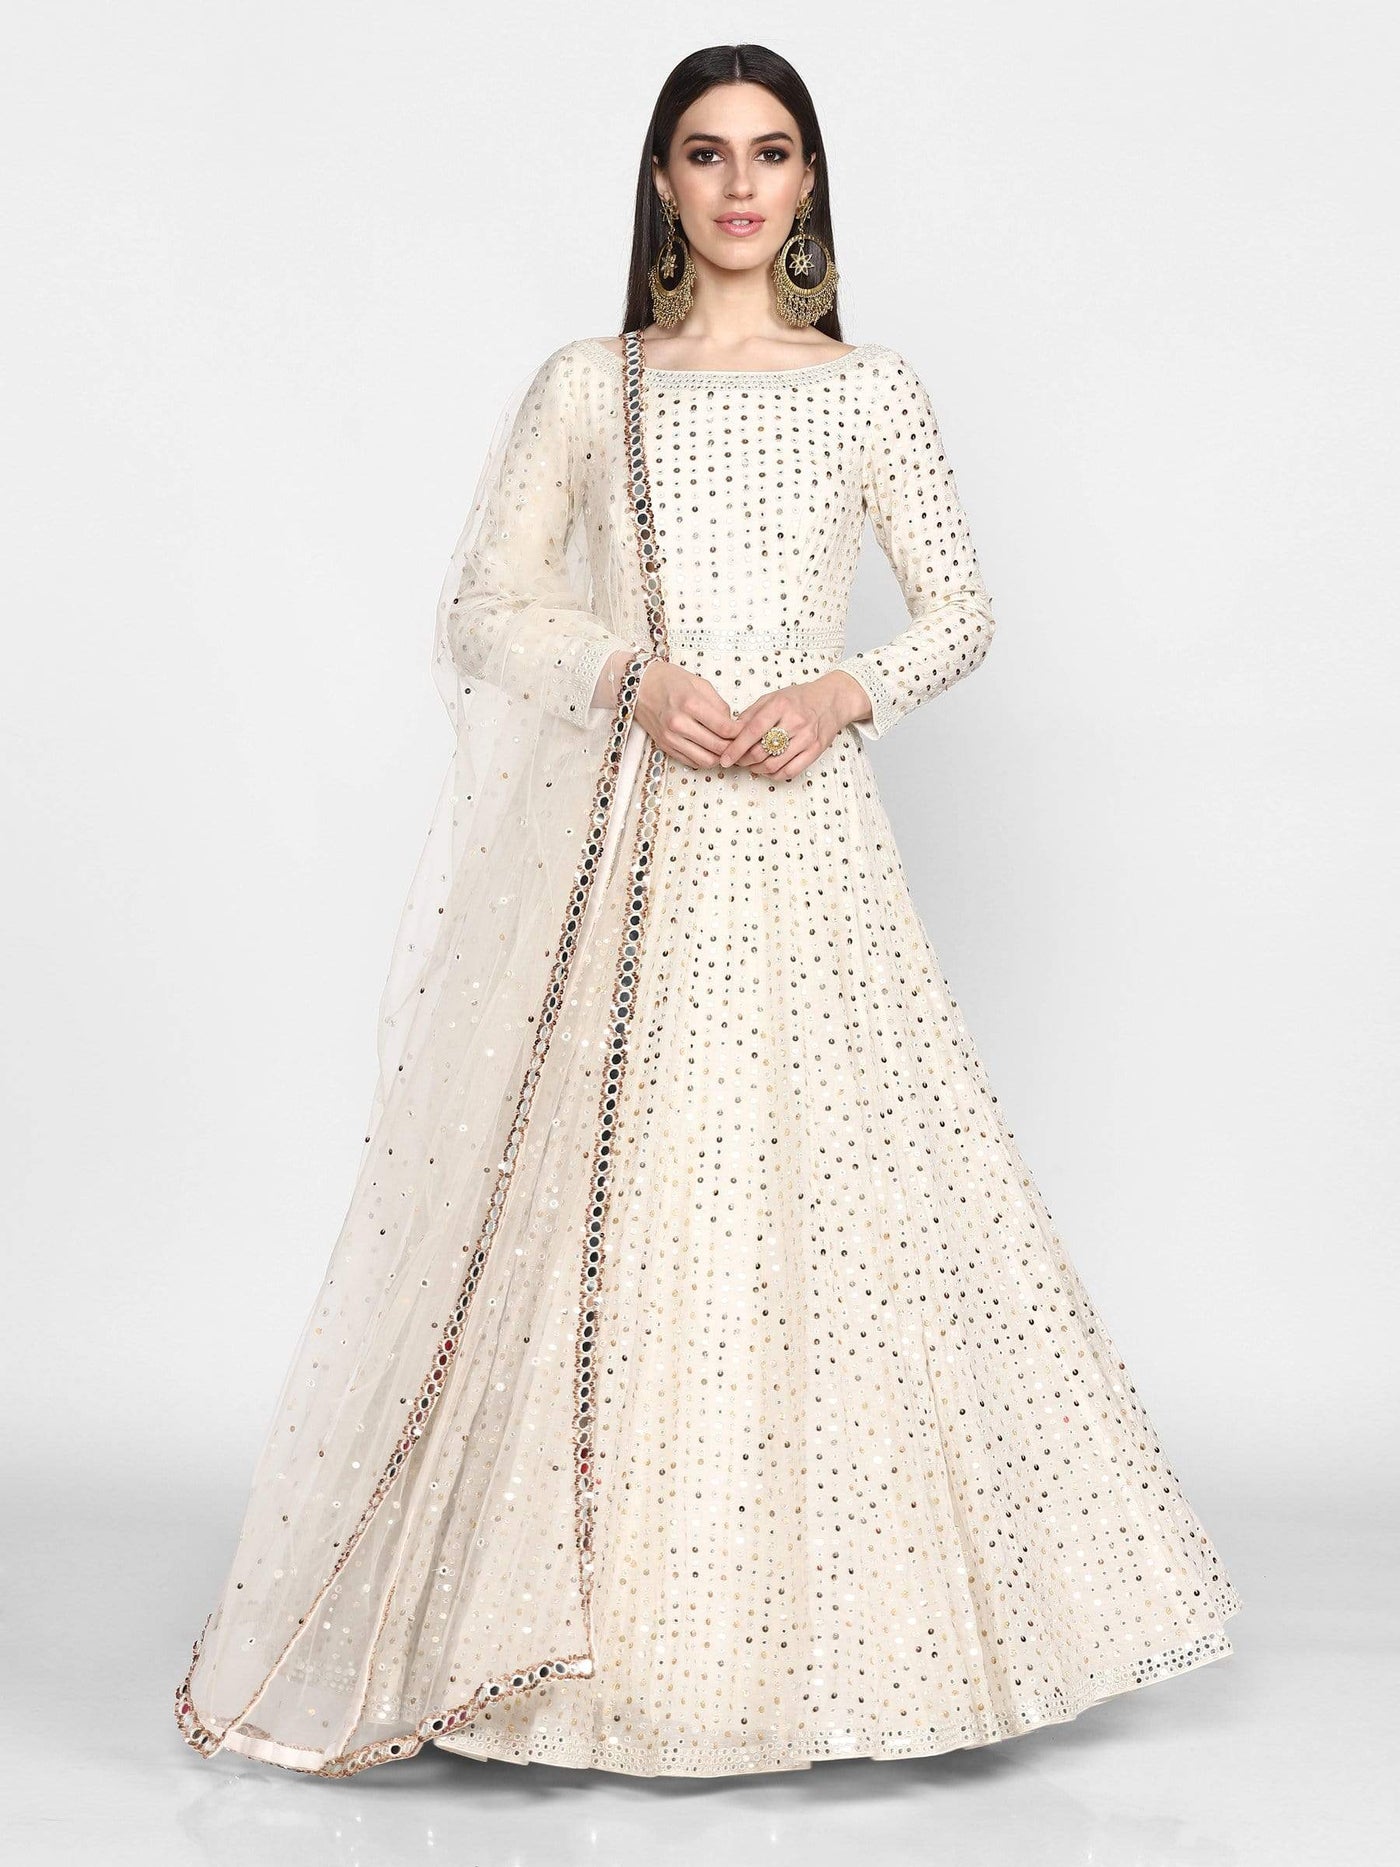 Off-White Anarkali Gown - Indian Clothing in Denver, CO, Aurora, CO, Boulder, CO, Fort Collins, CO, Colorado Springs, CO, Parker, CO, Highlands Ranch, CO, Cherry Creek, CO, Centennial, CO, and Longmont, CO. Nationwide shipping USA - India Fashion X